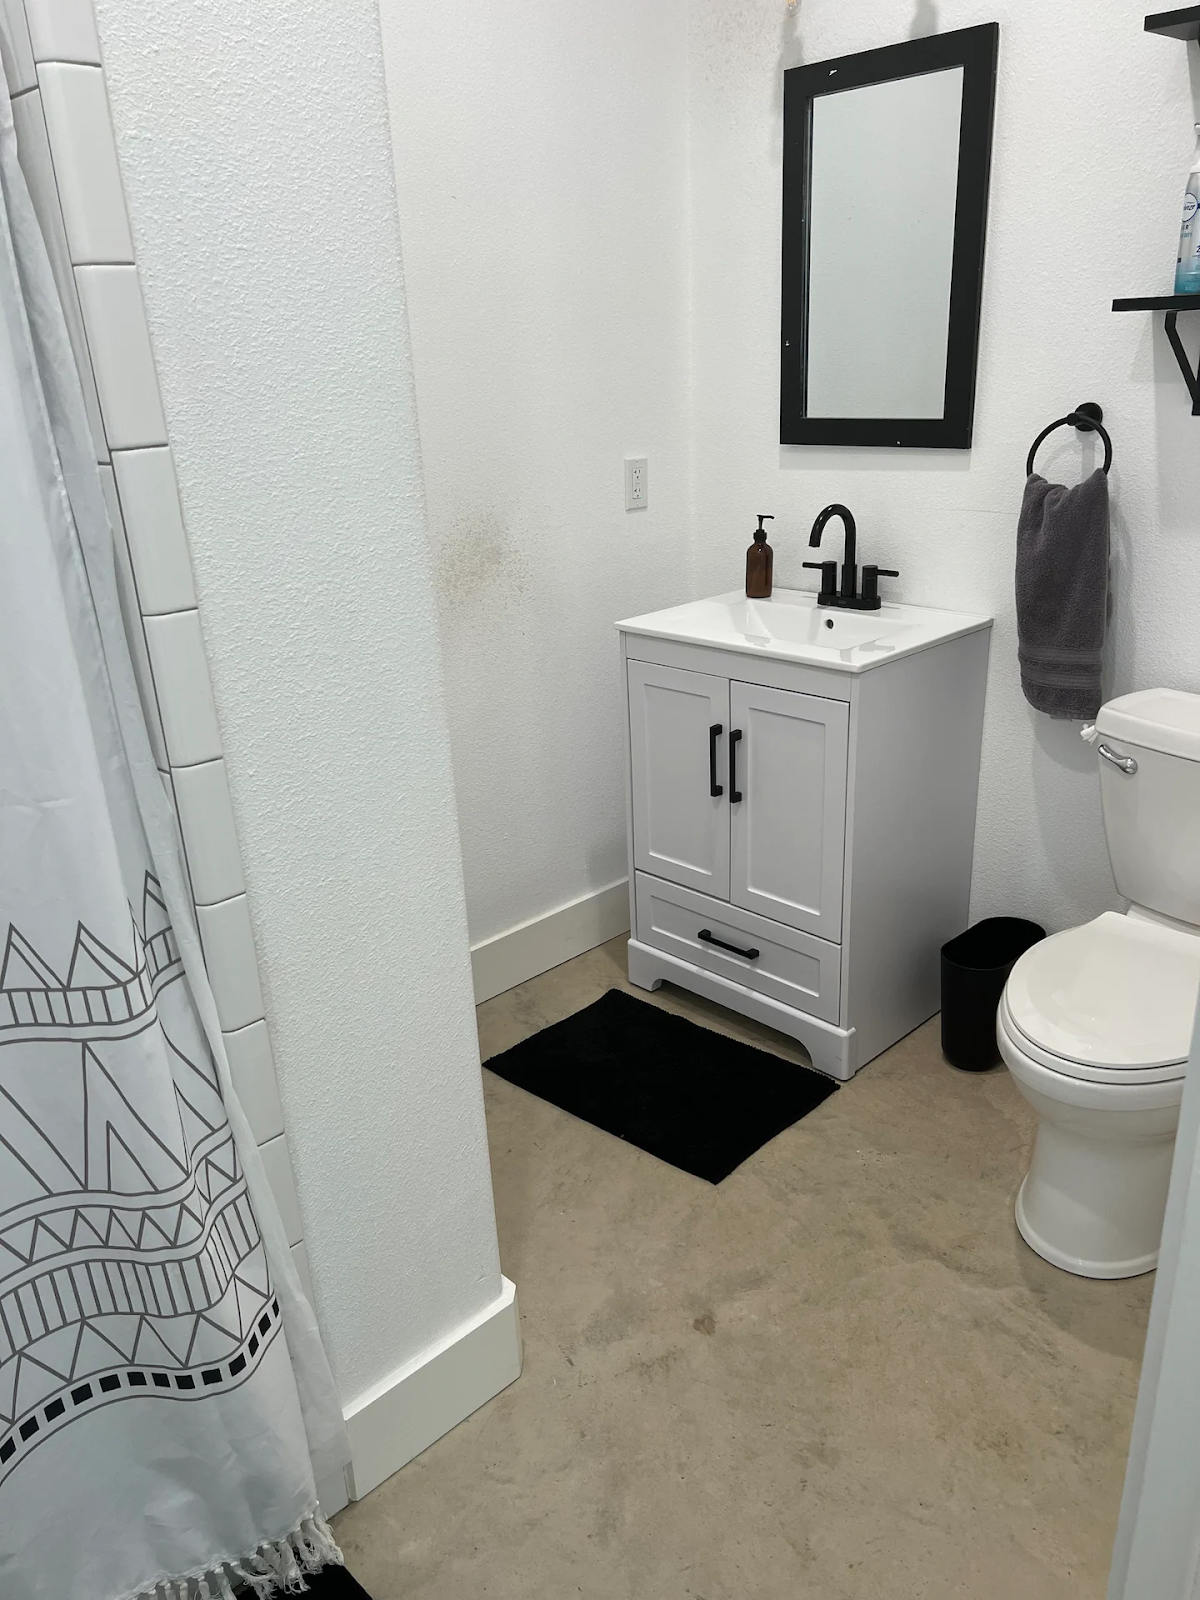 bathroom with black and white theme